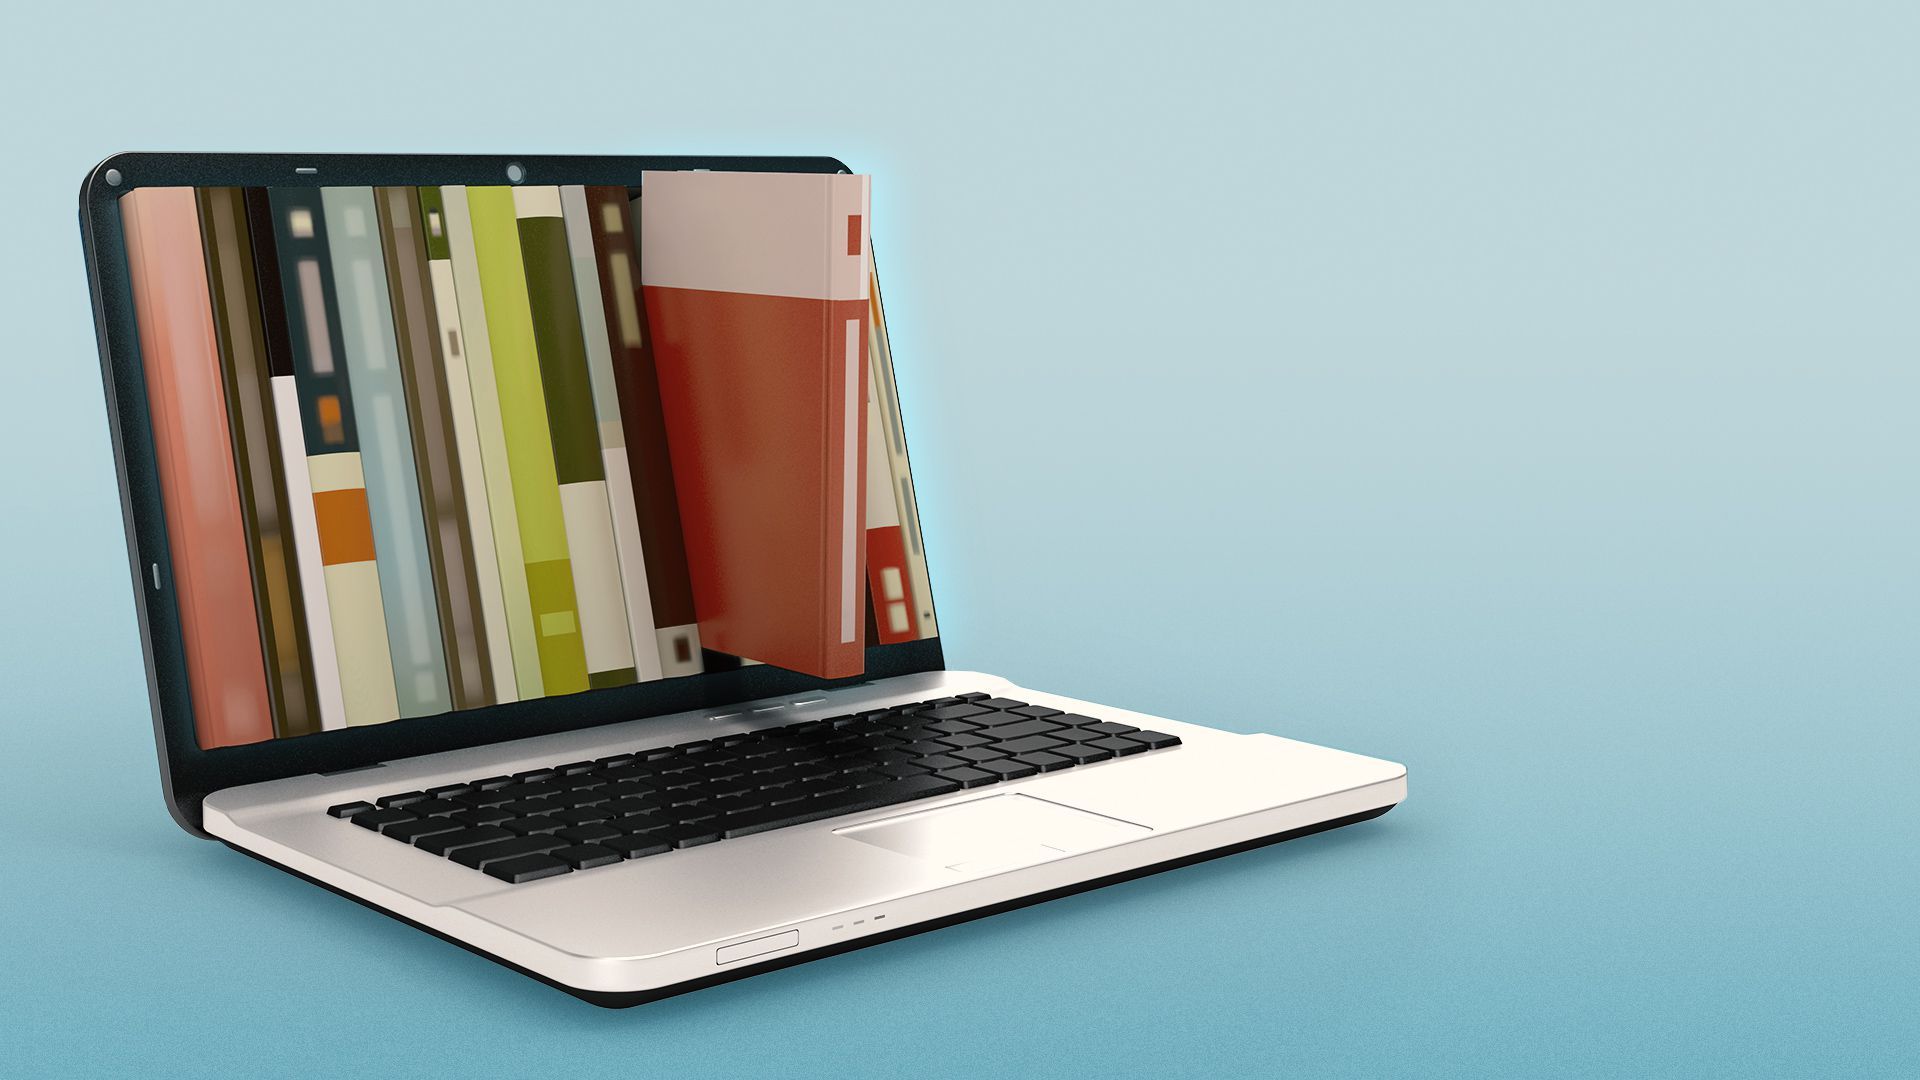 Illustration of a laptop with the screen made out of a bookshelf.